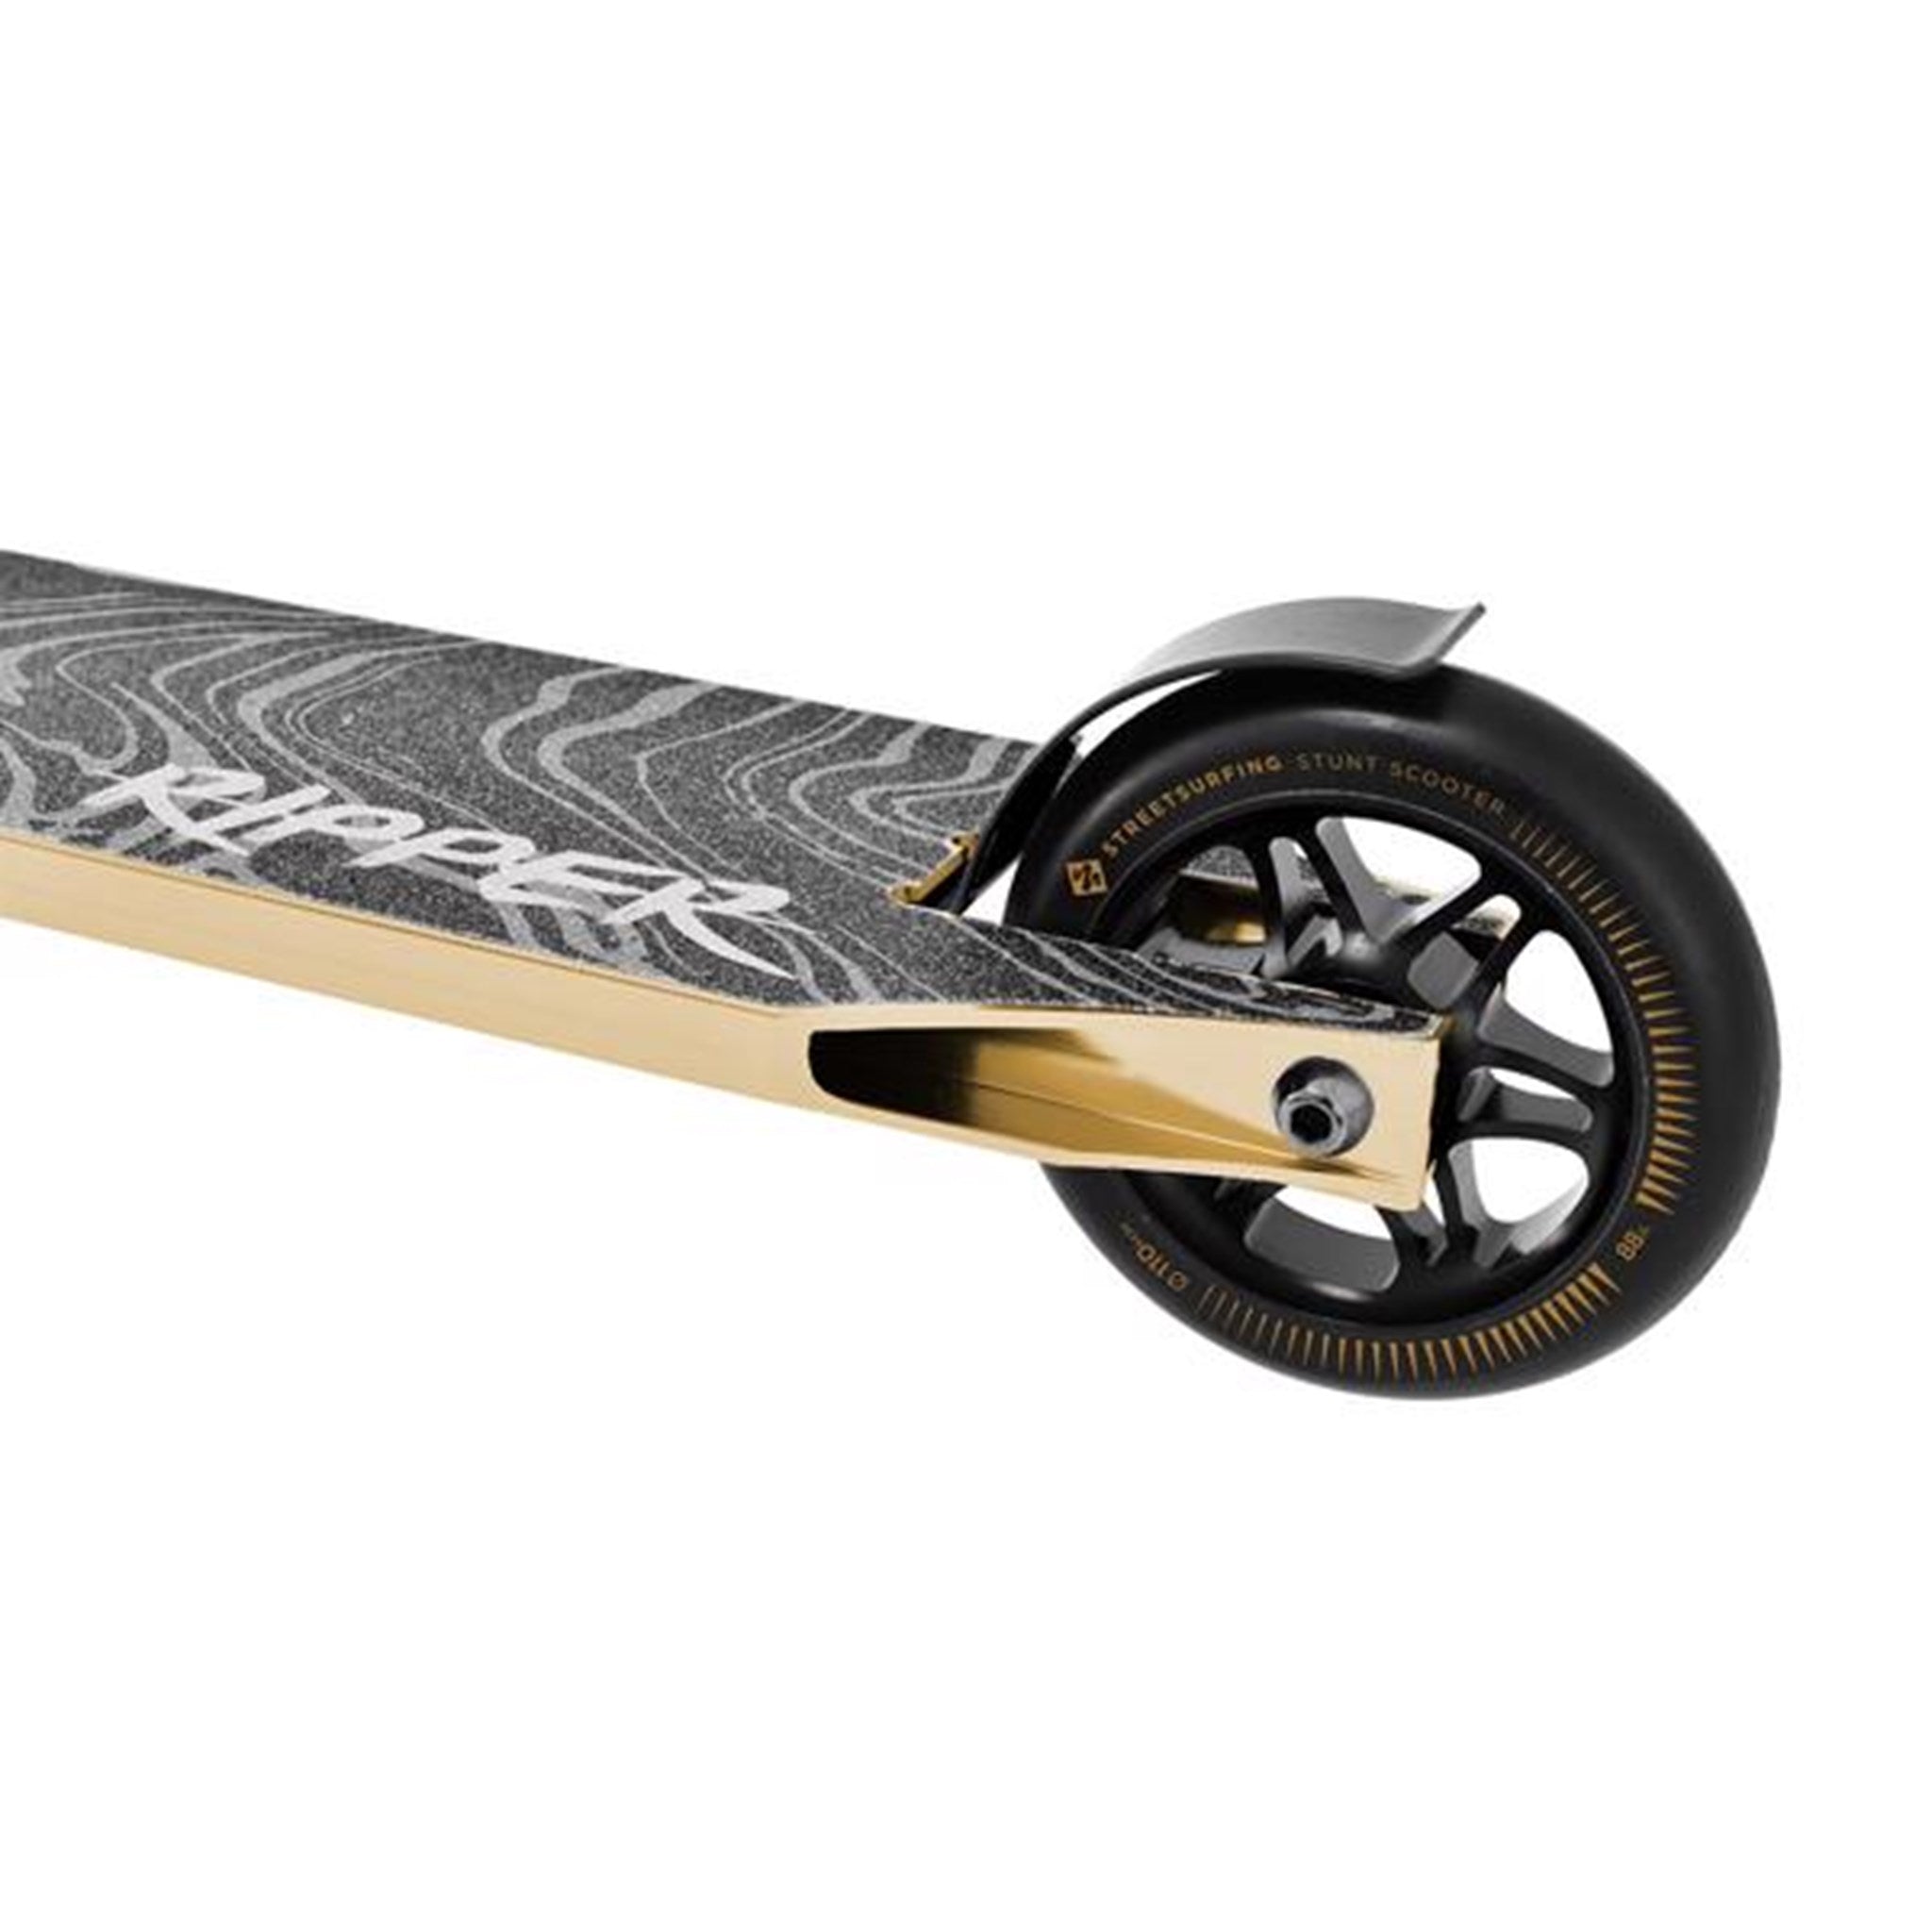 Street Surfing Street Scooter Ripper Bloody Gold 2